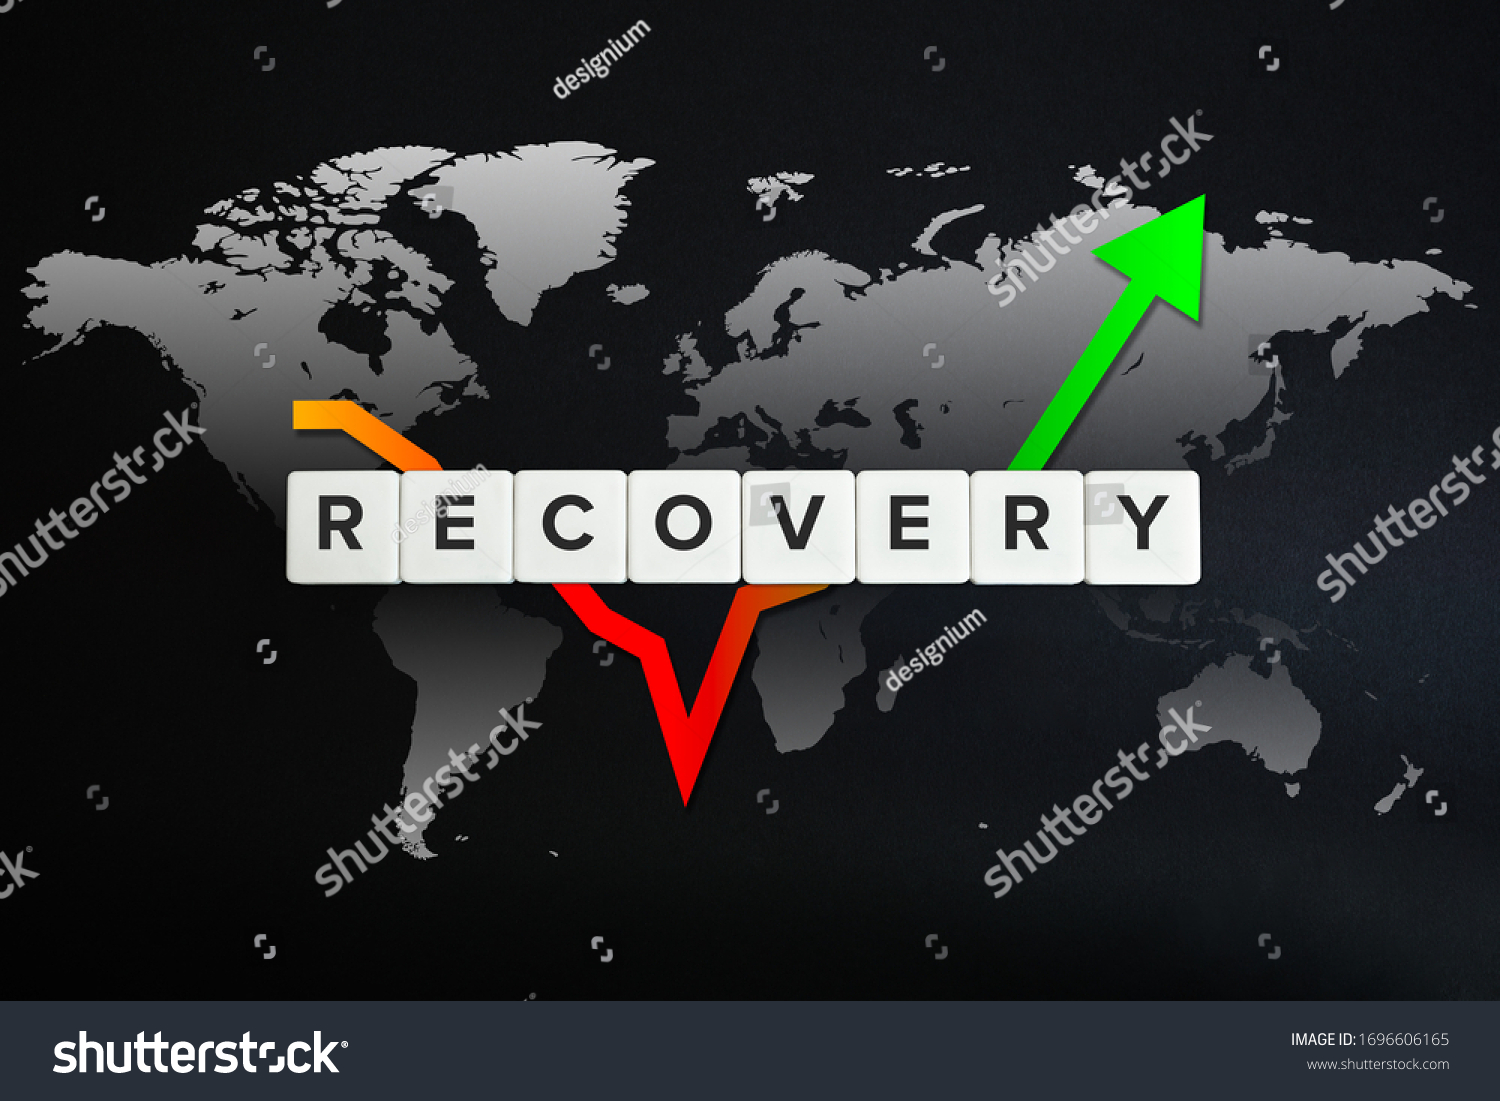 Global economy recovery concept. Financial, industrial, business and market sector comeback and upturn. Block letters, stock chart and world map on black background. #1696606165